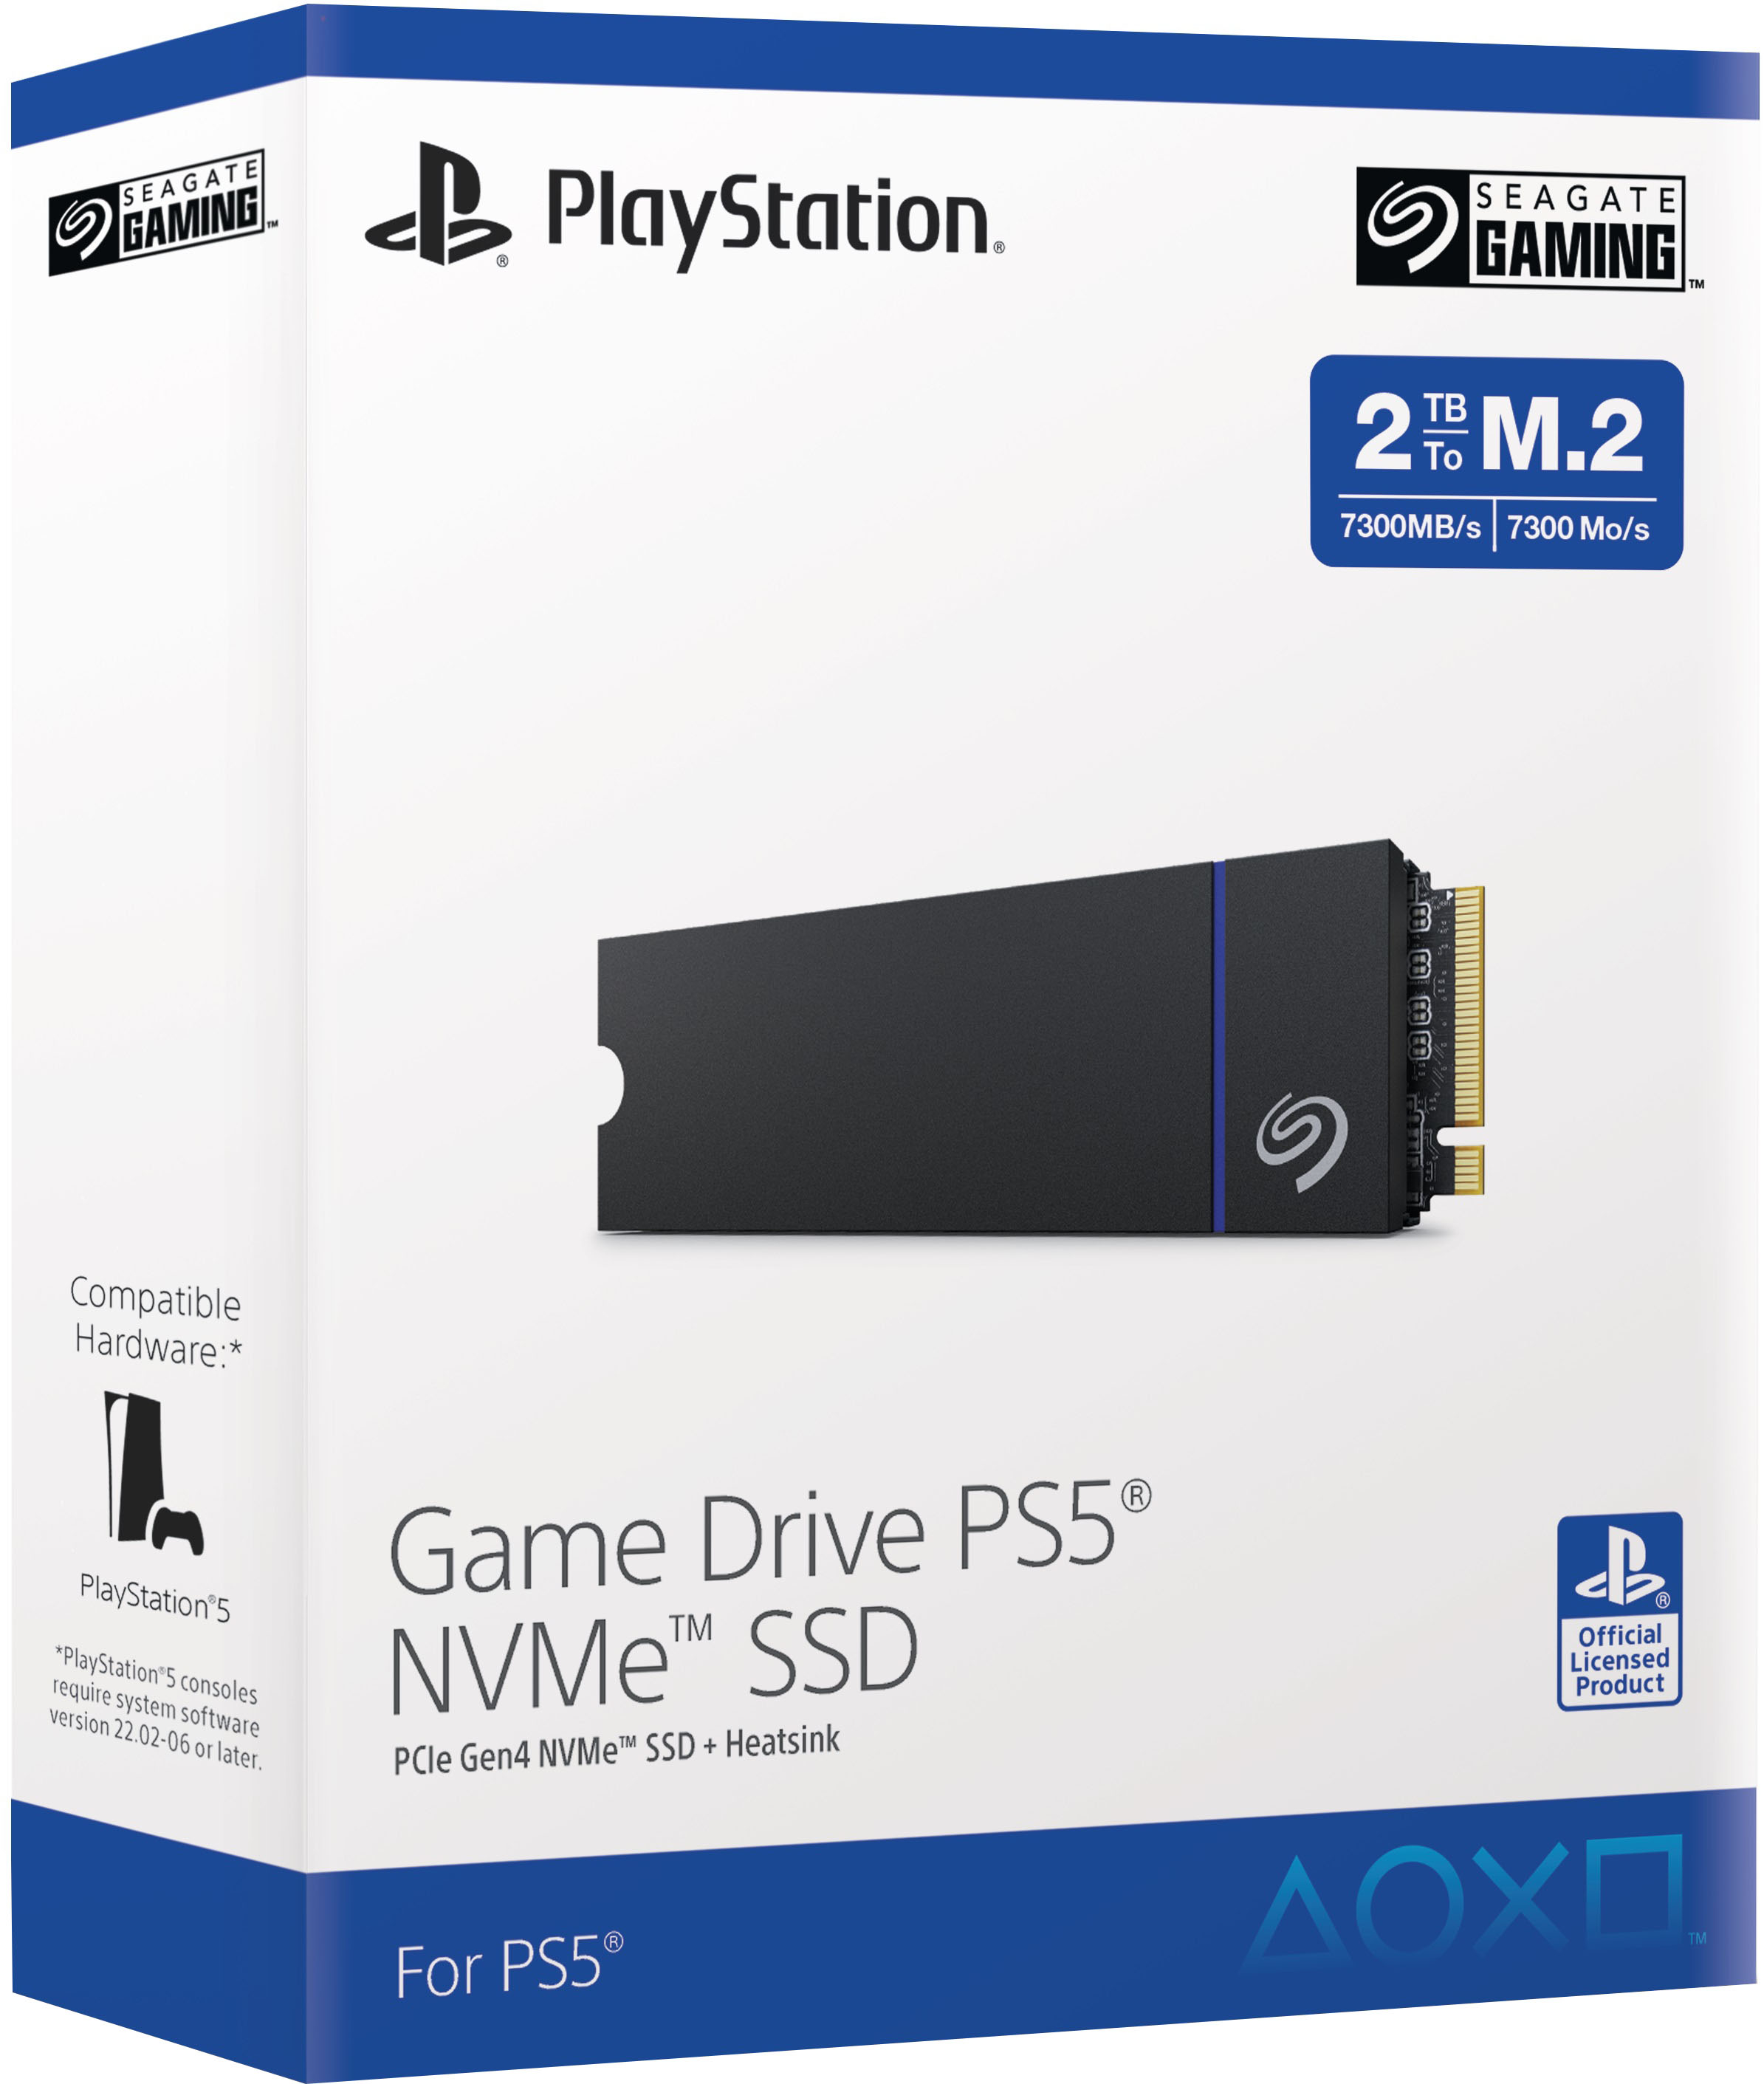 Officially Licensed Seagate Game Drive PS5 NVMe SSD for